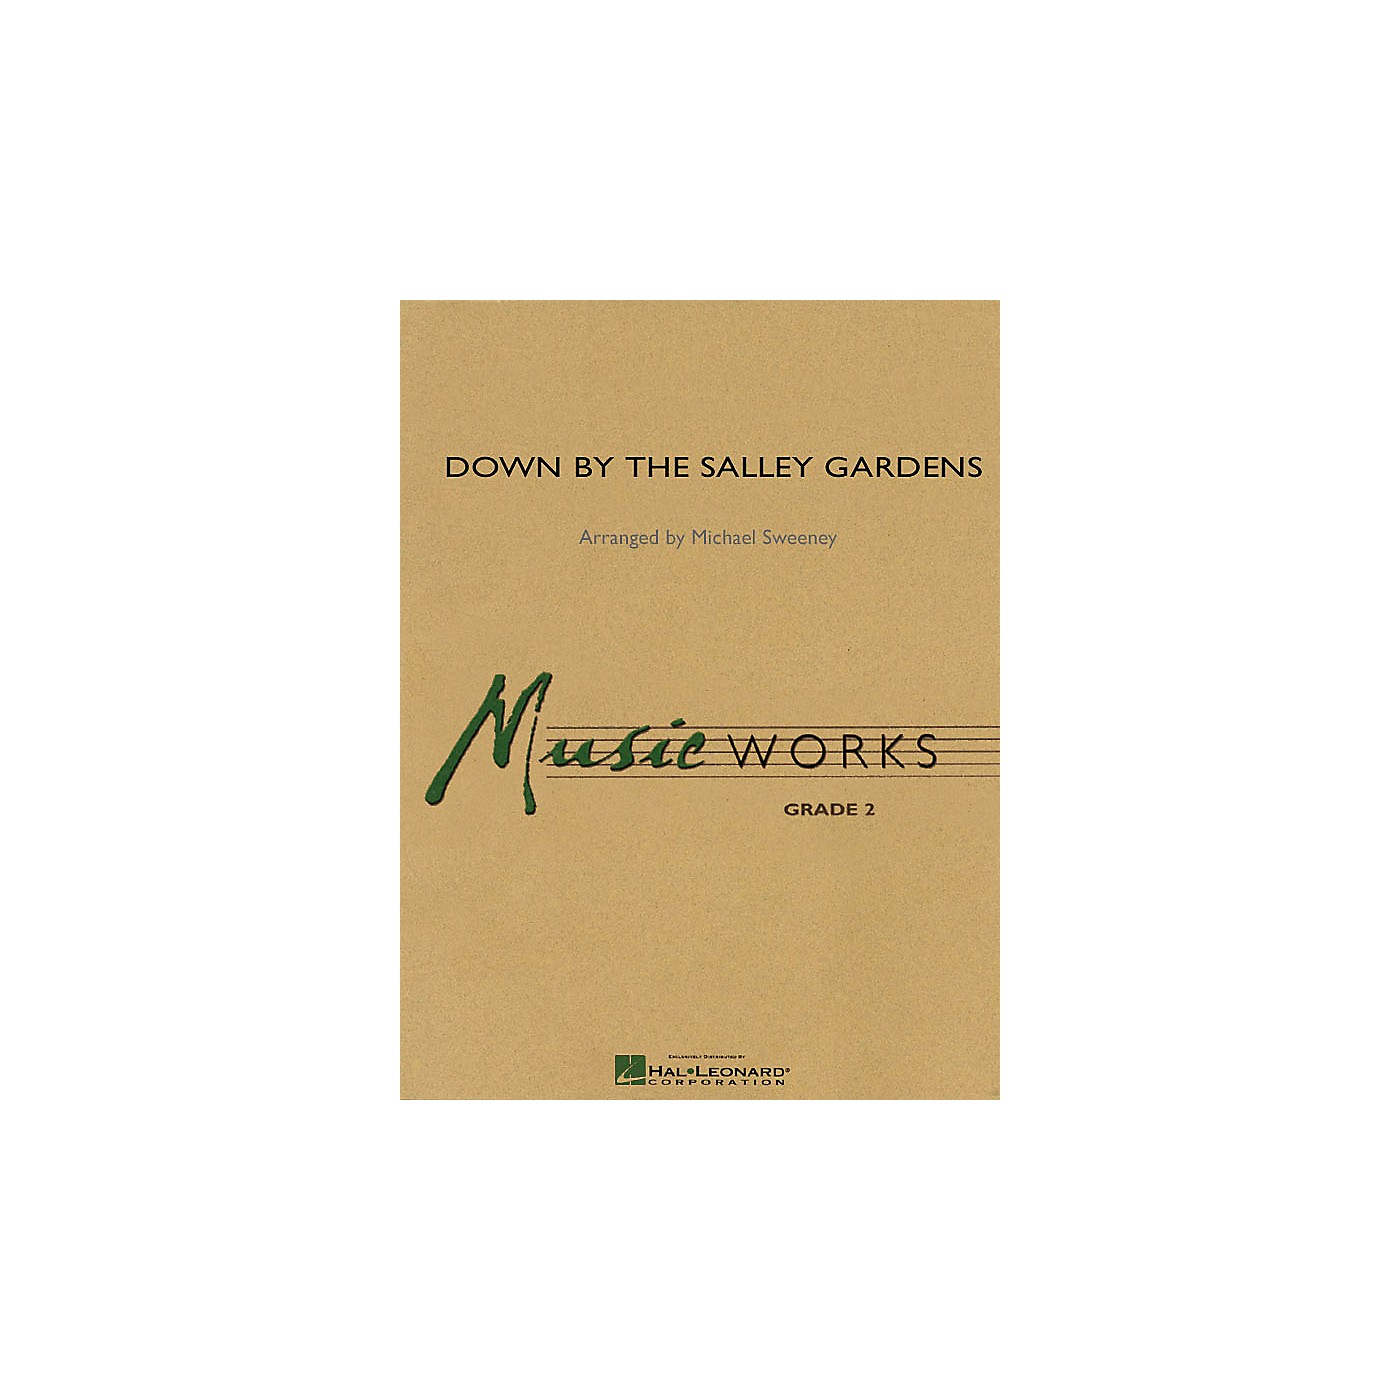 Hal Leonard Down by the Salley Gardens Concert Band Level 2 Arranged by Michael Sweeney thumbnail